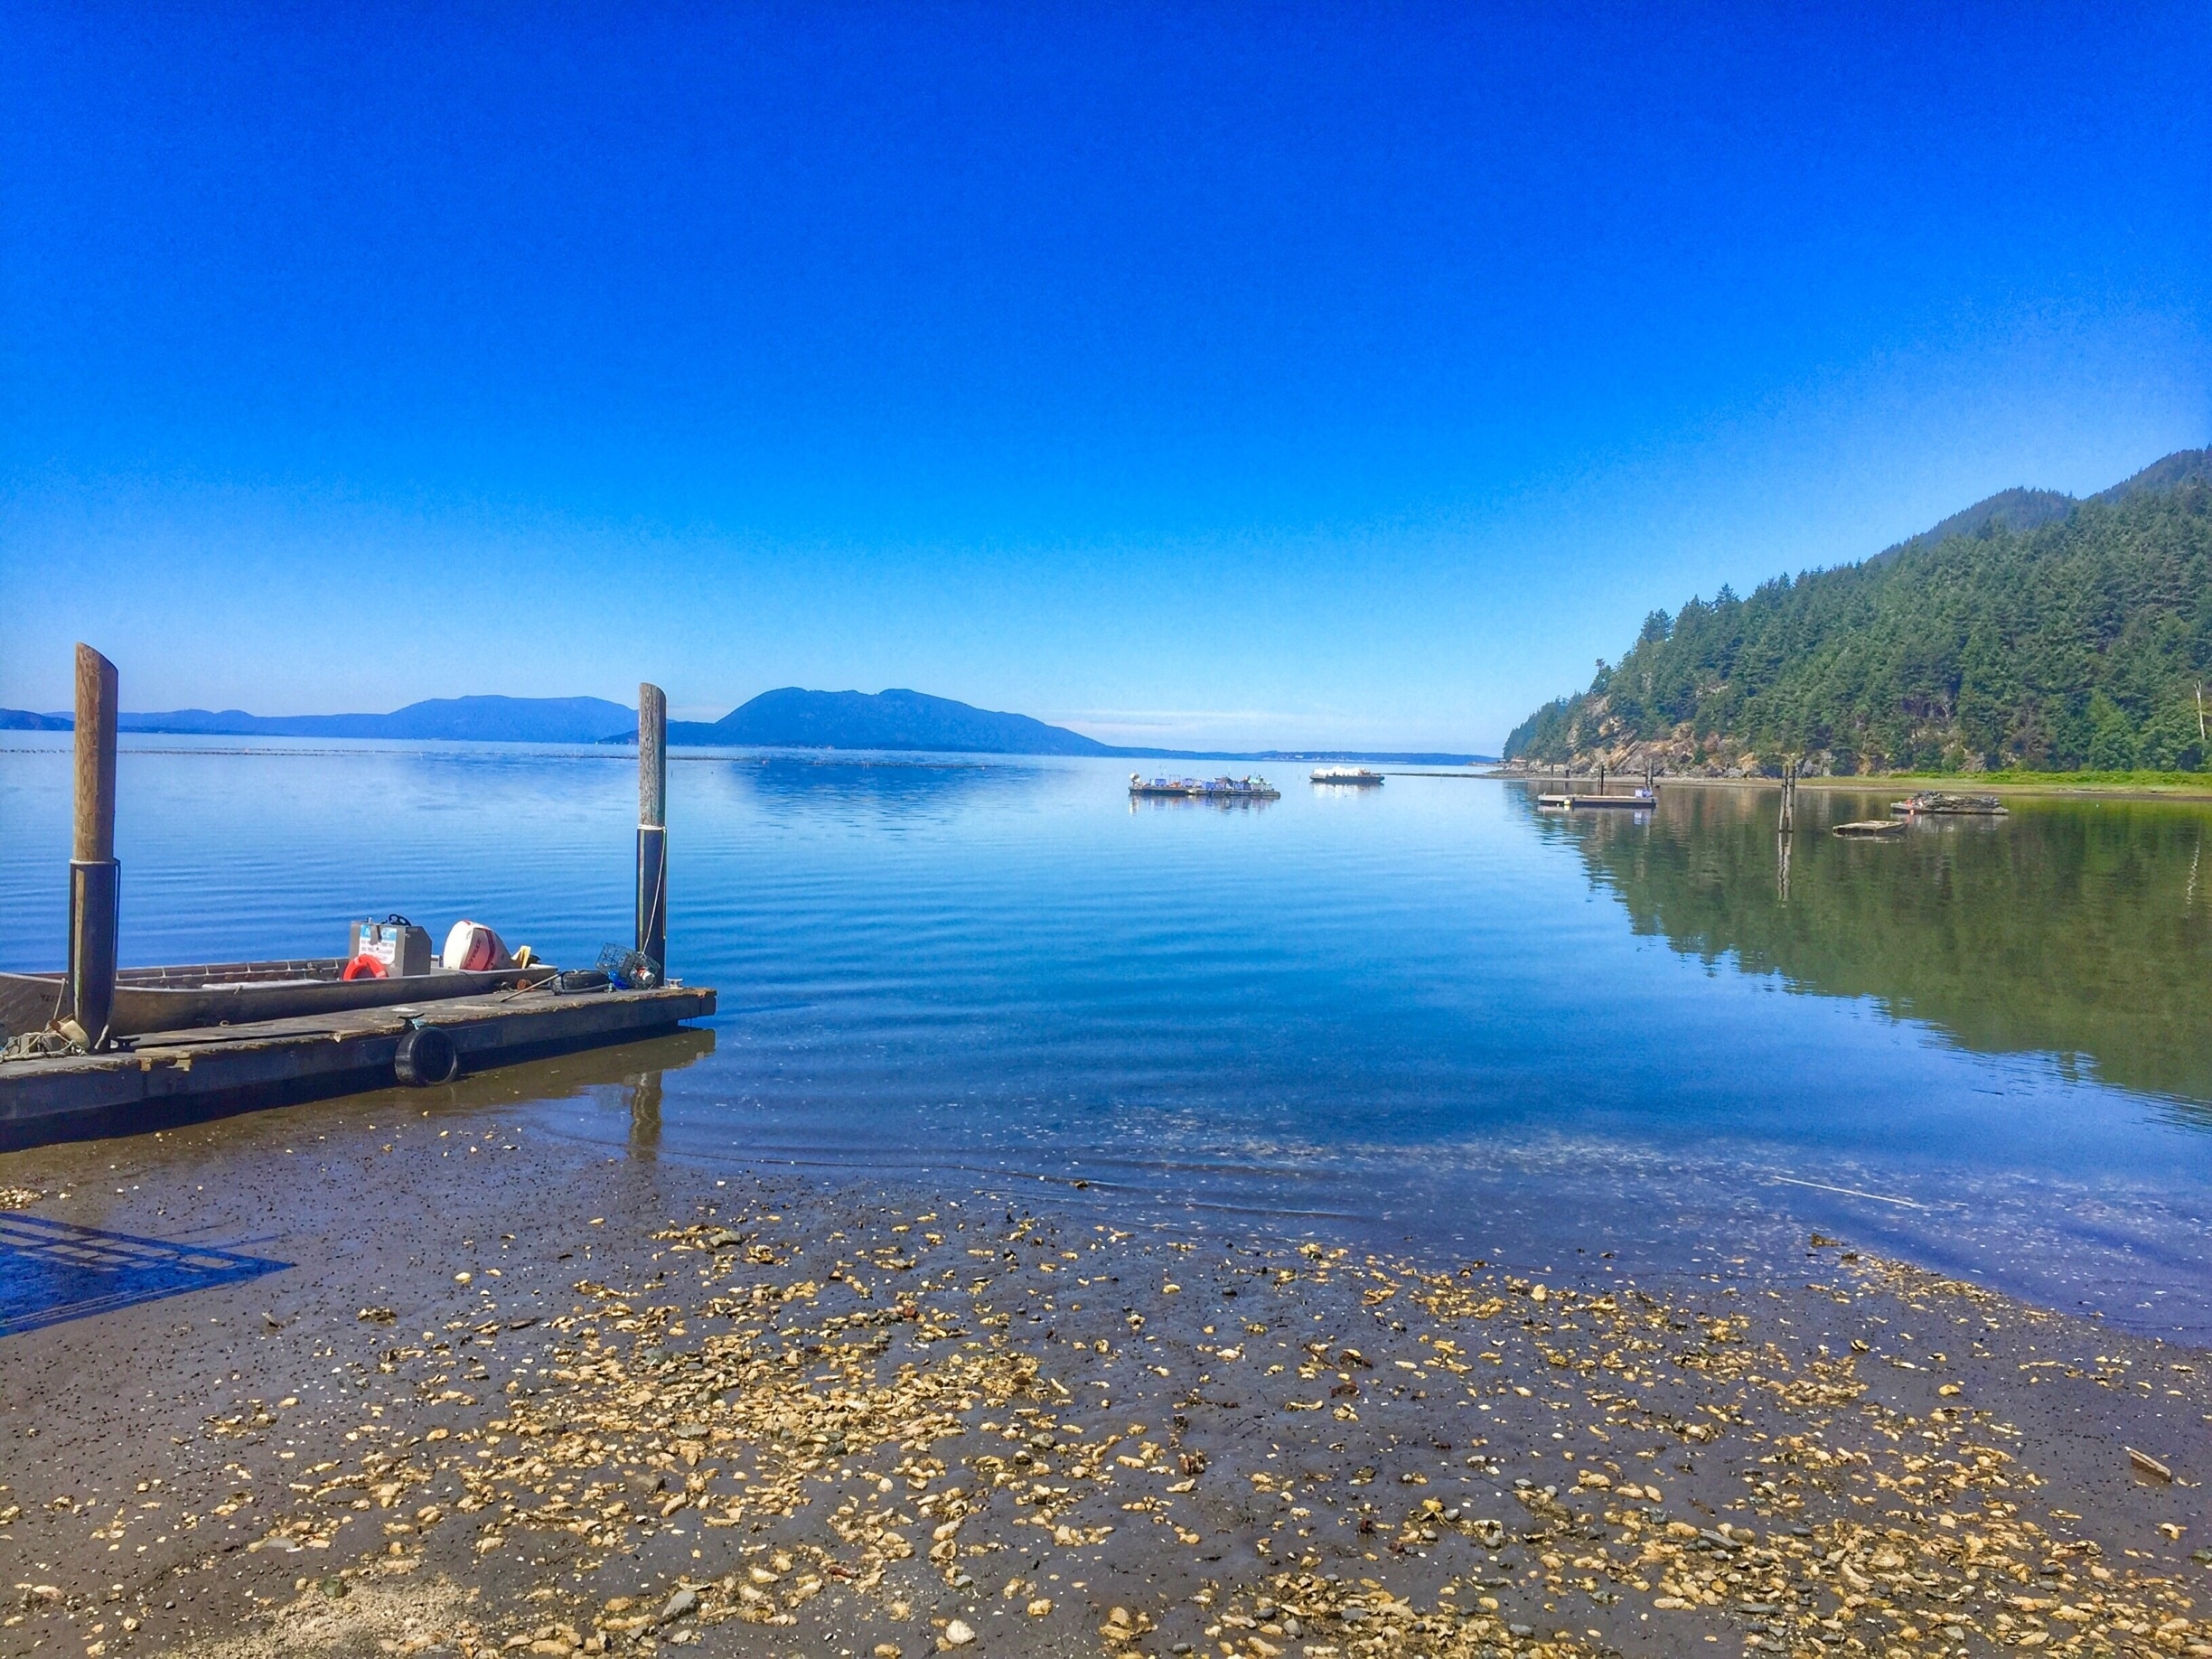 This cool shellfish farm just north of Seattle, WA is a great place to buy fresh oysters, especially after hiking to Oyster Dome. 

#AquaTrove